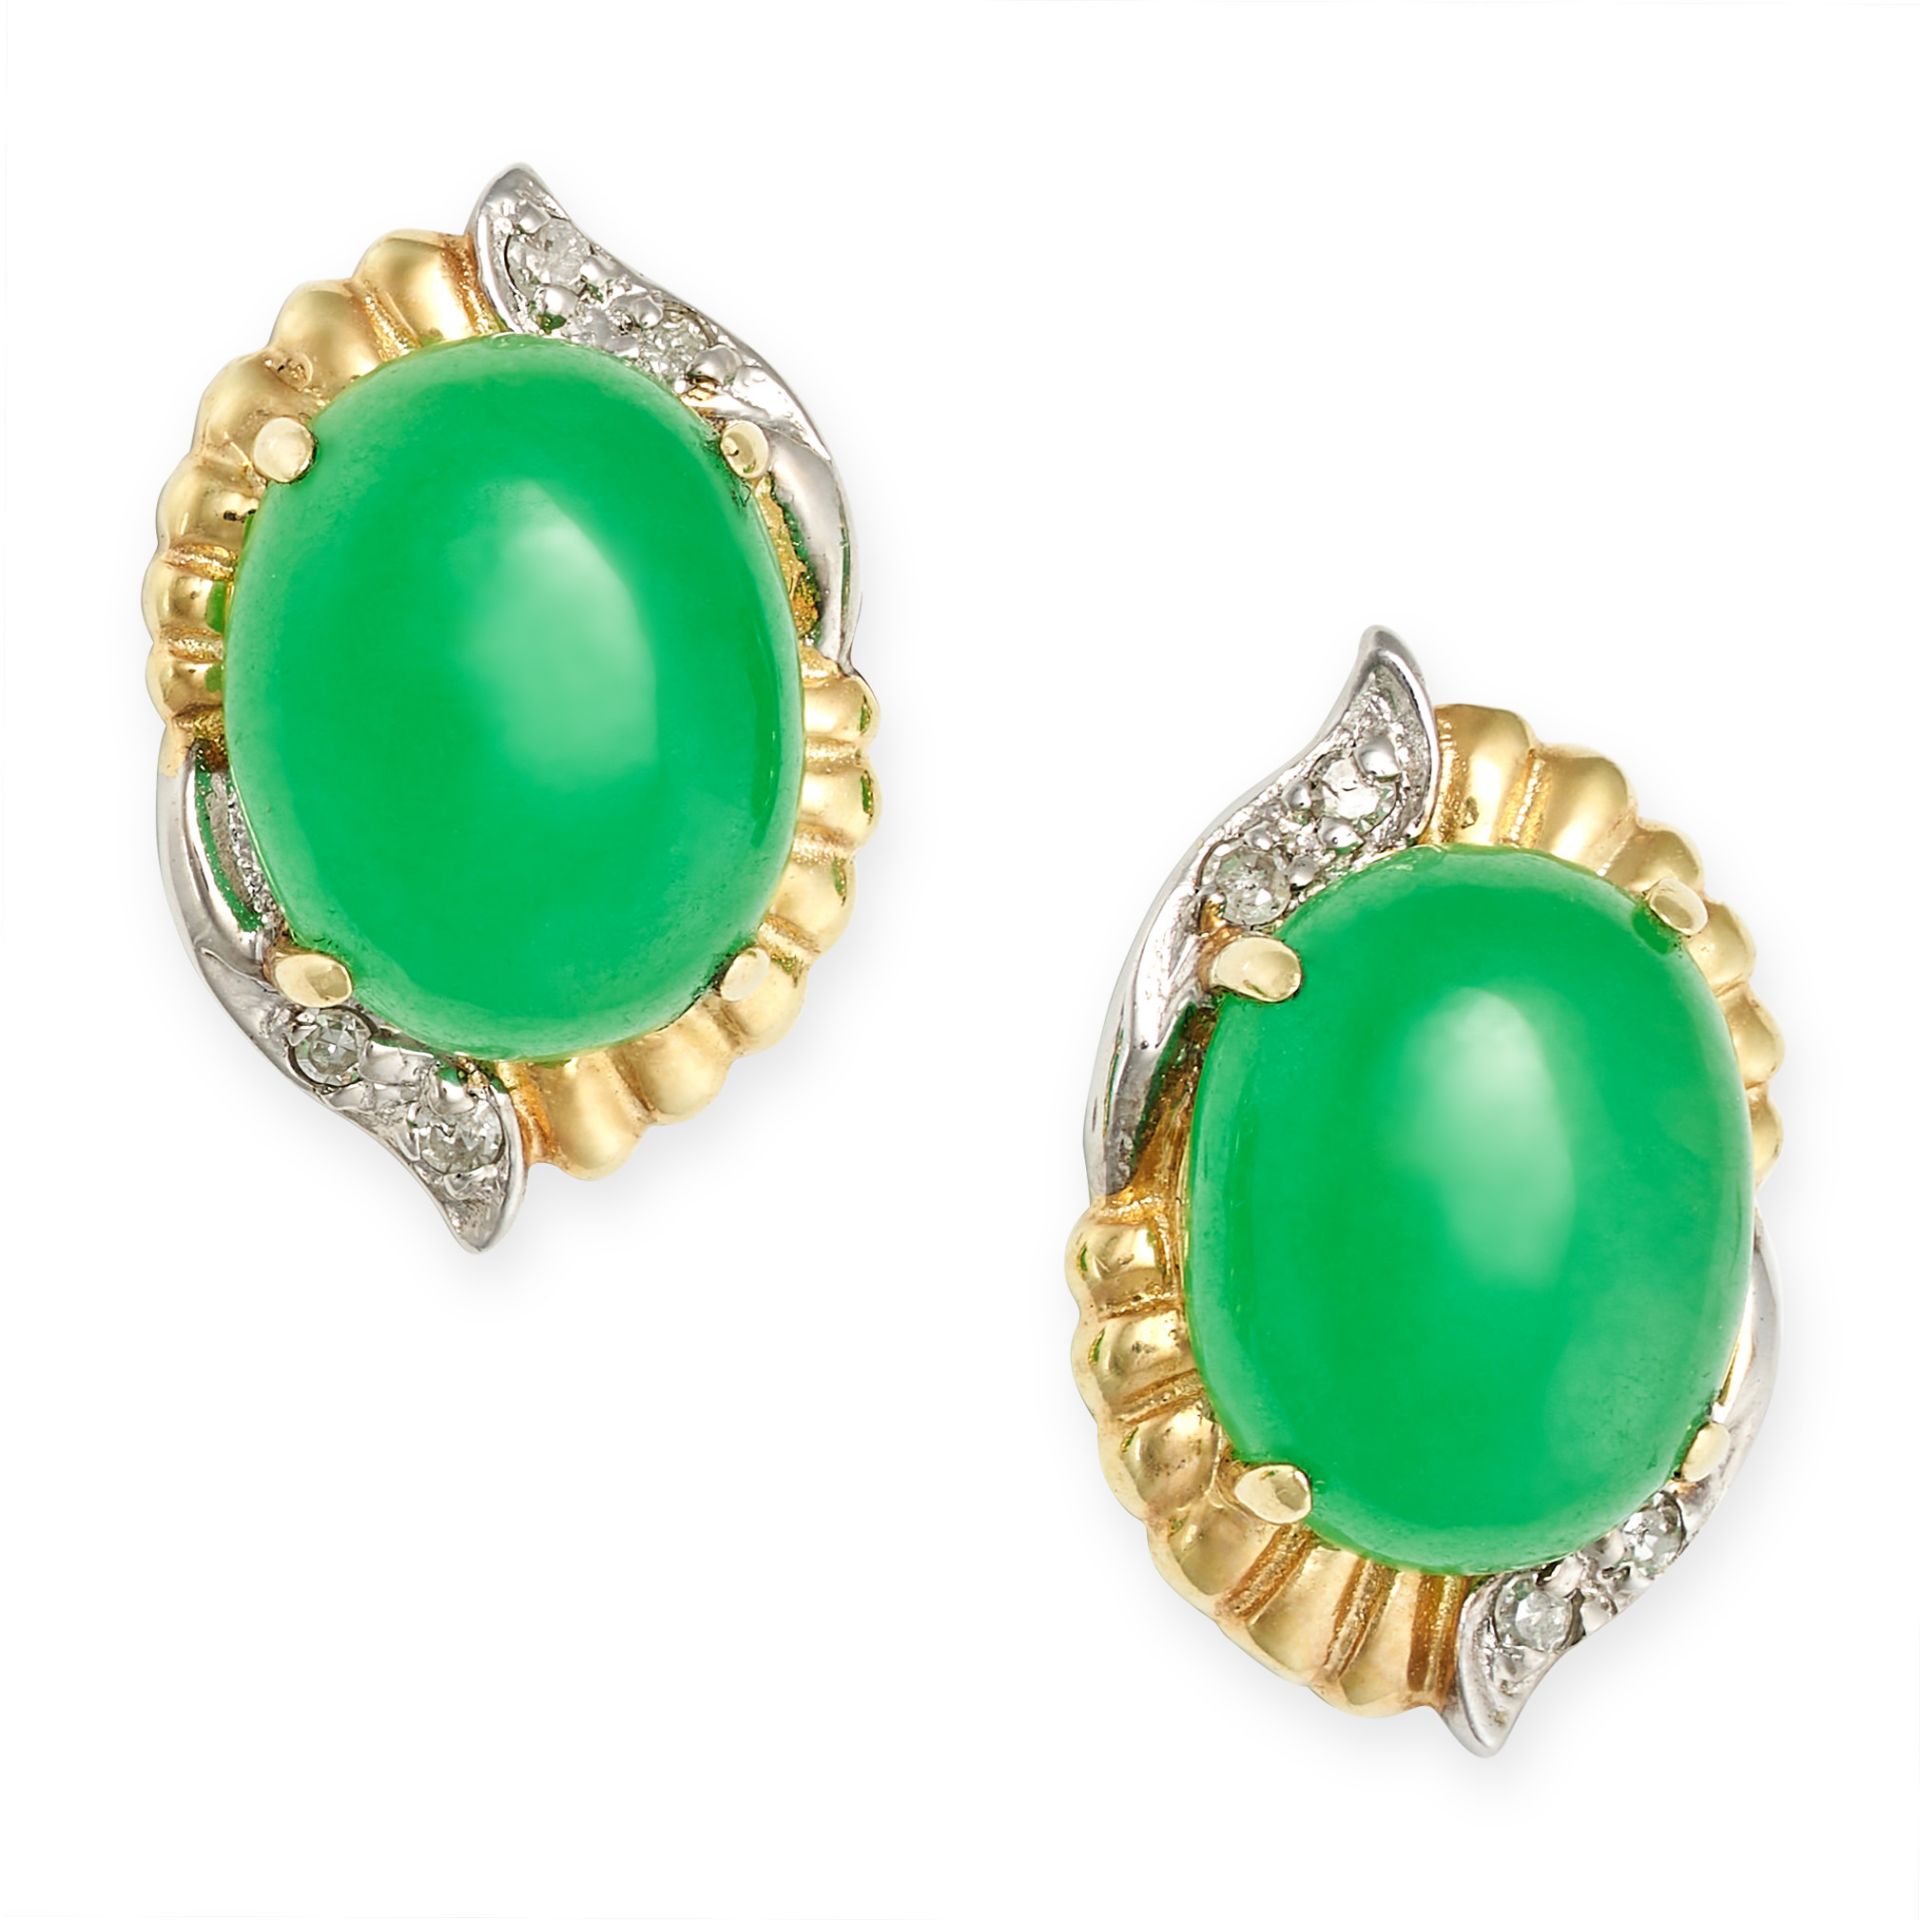 A PAIR OF GREEN QUARTZITE AND DIAMOND EARRINGS in 14ct yellow and white gold, each set with a cab...